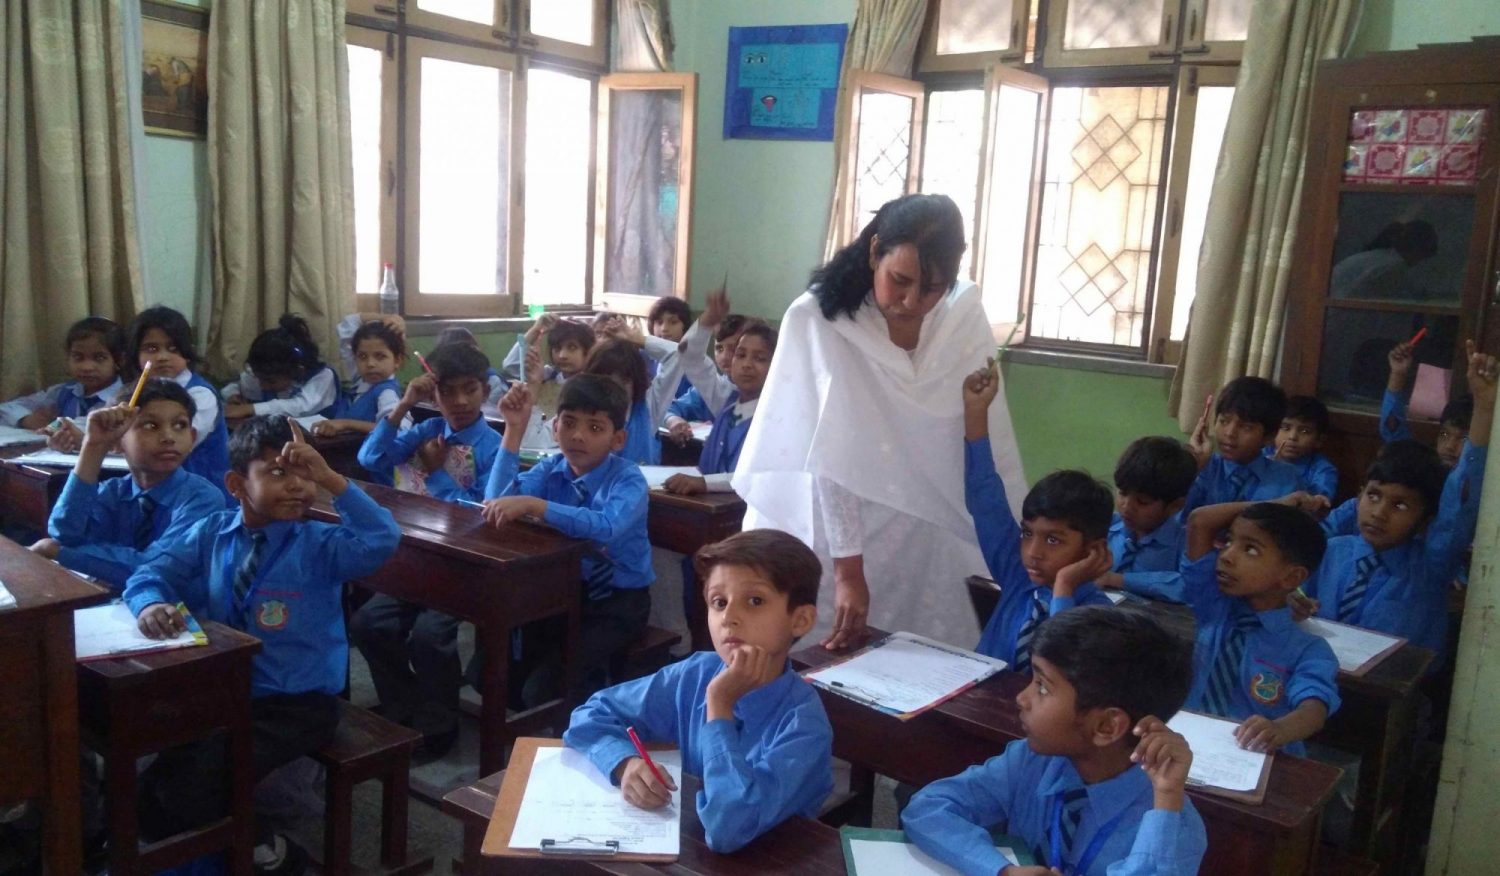 Maria Daniel SL is shown working with students in a classroom.